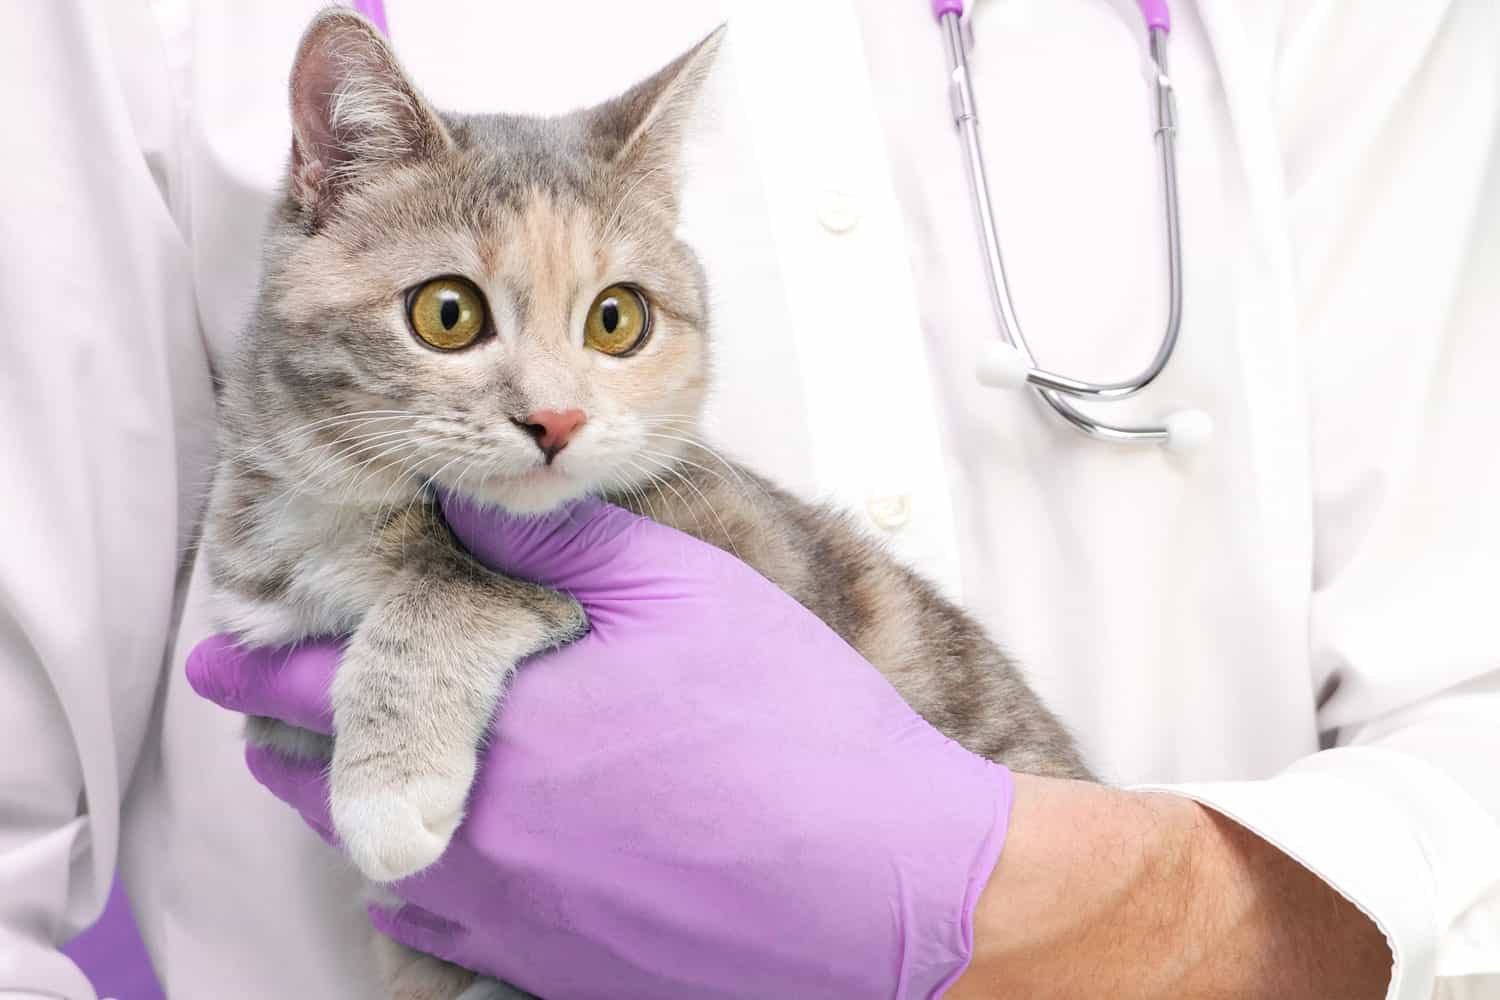 A veterinary professional conducting a thorough examination of a cat's health, specifically focusing on its liver enzyme levels.